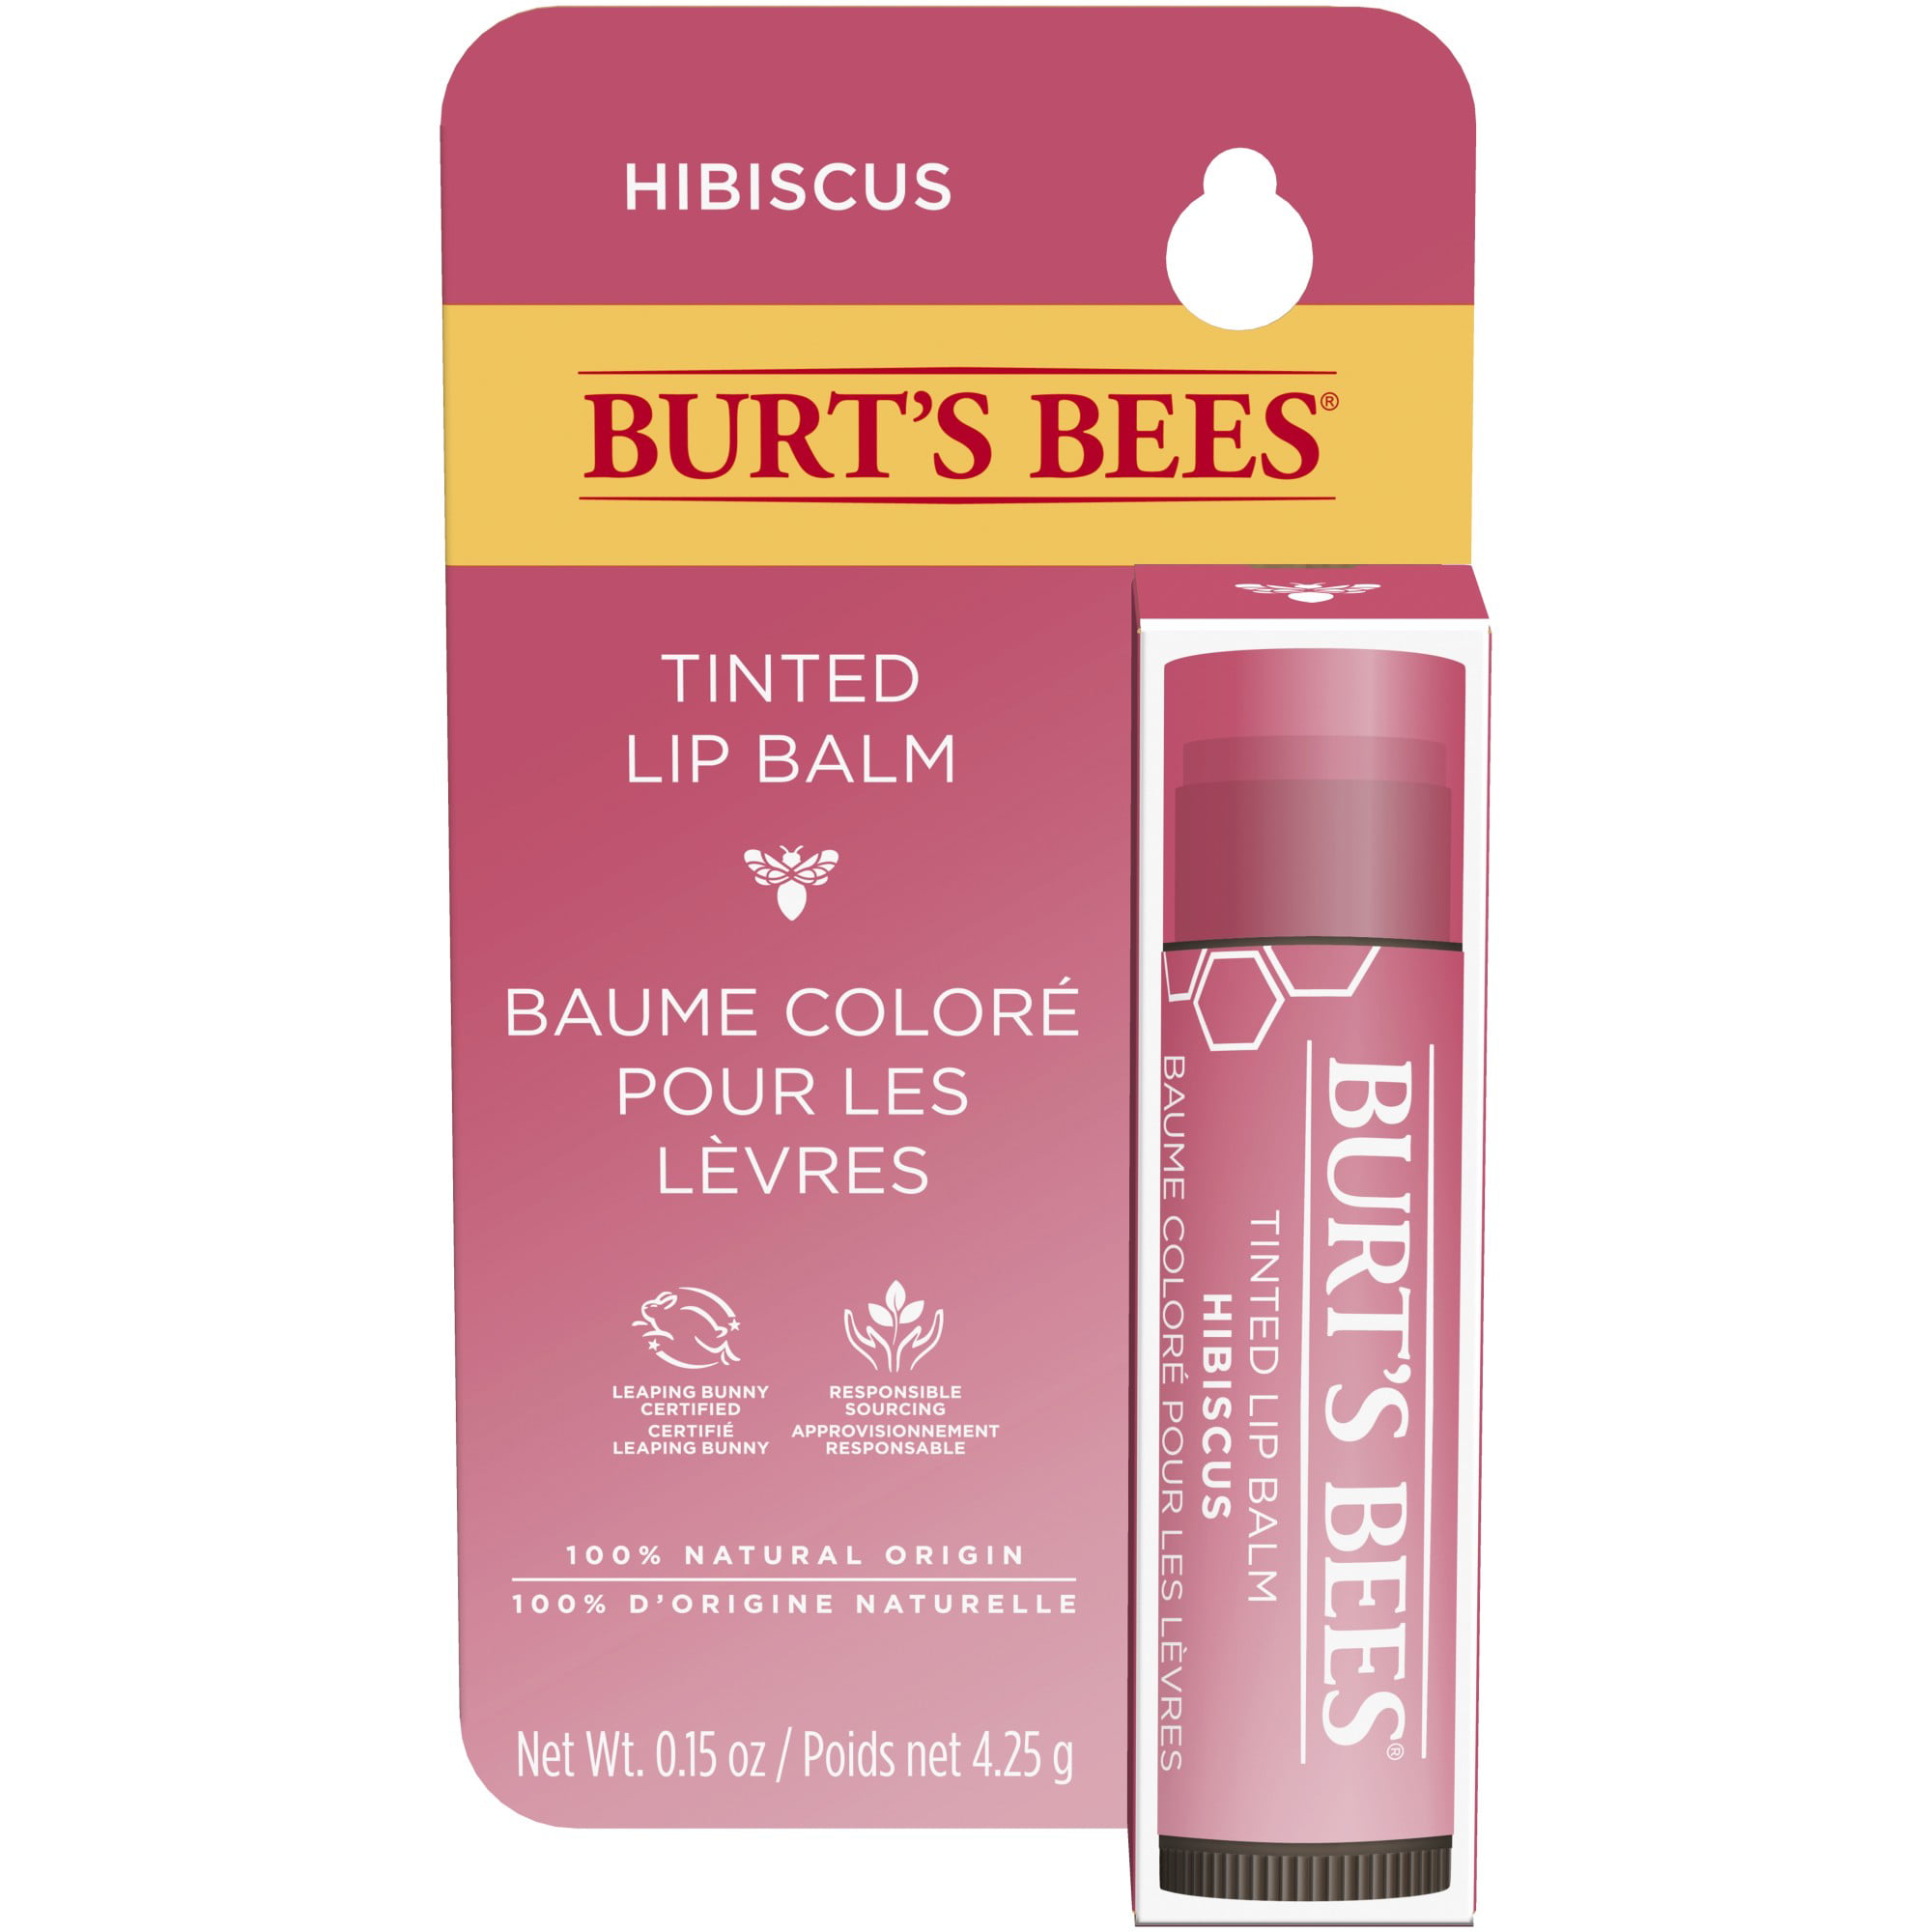 Burt's Bees 100% Natural Origin Tinted Lip Balm, Hibiscus with Shea Butter, 1 Tube in Blister Box